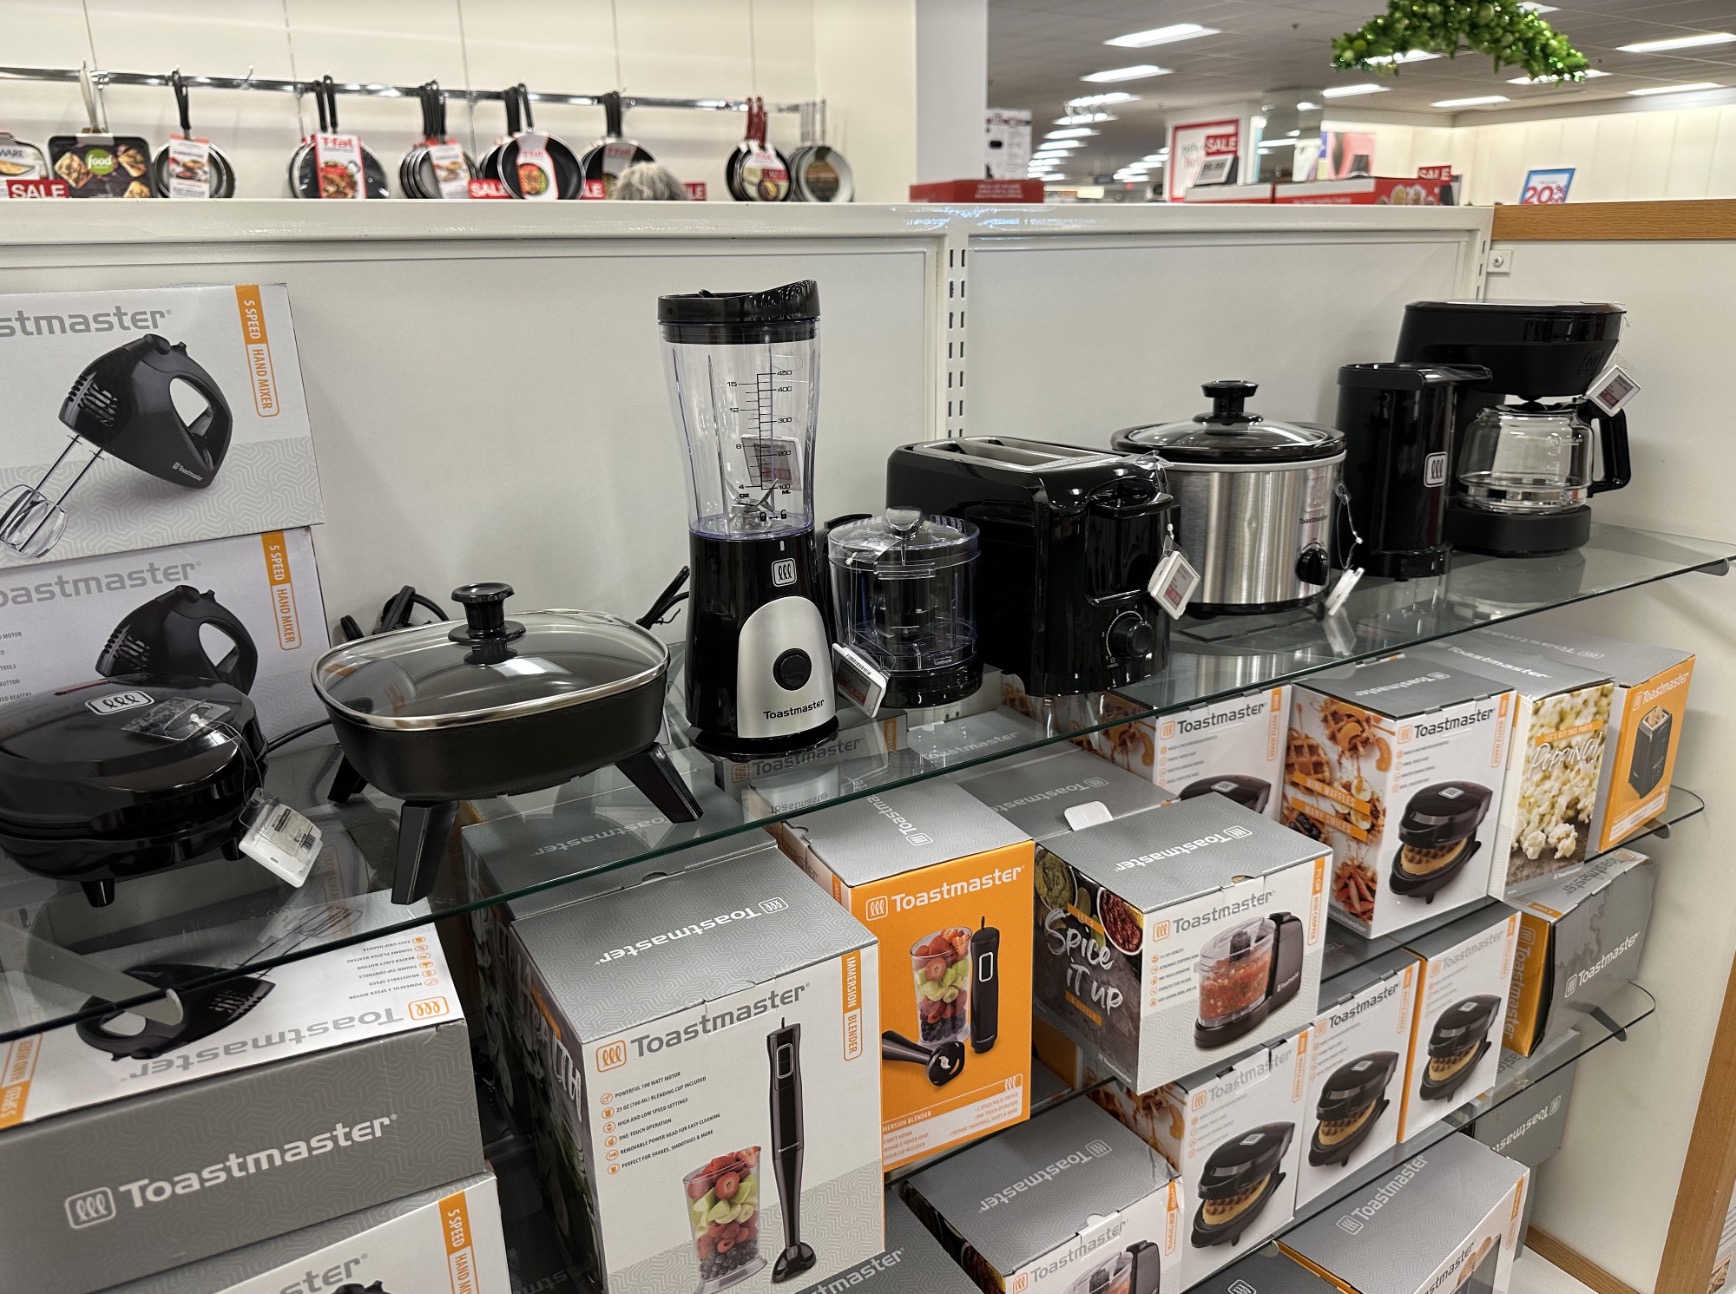 *HOT* Toastmaster Kitchen Home equipment solely $1.66 after rebate and Kohl’s money!!